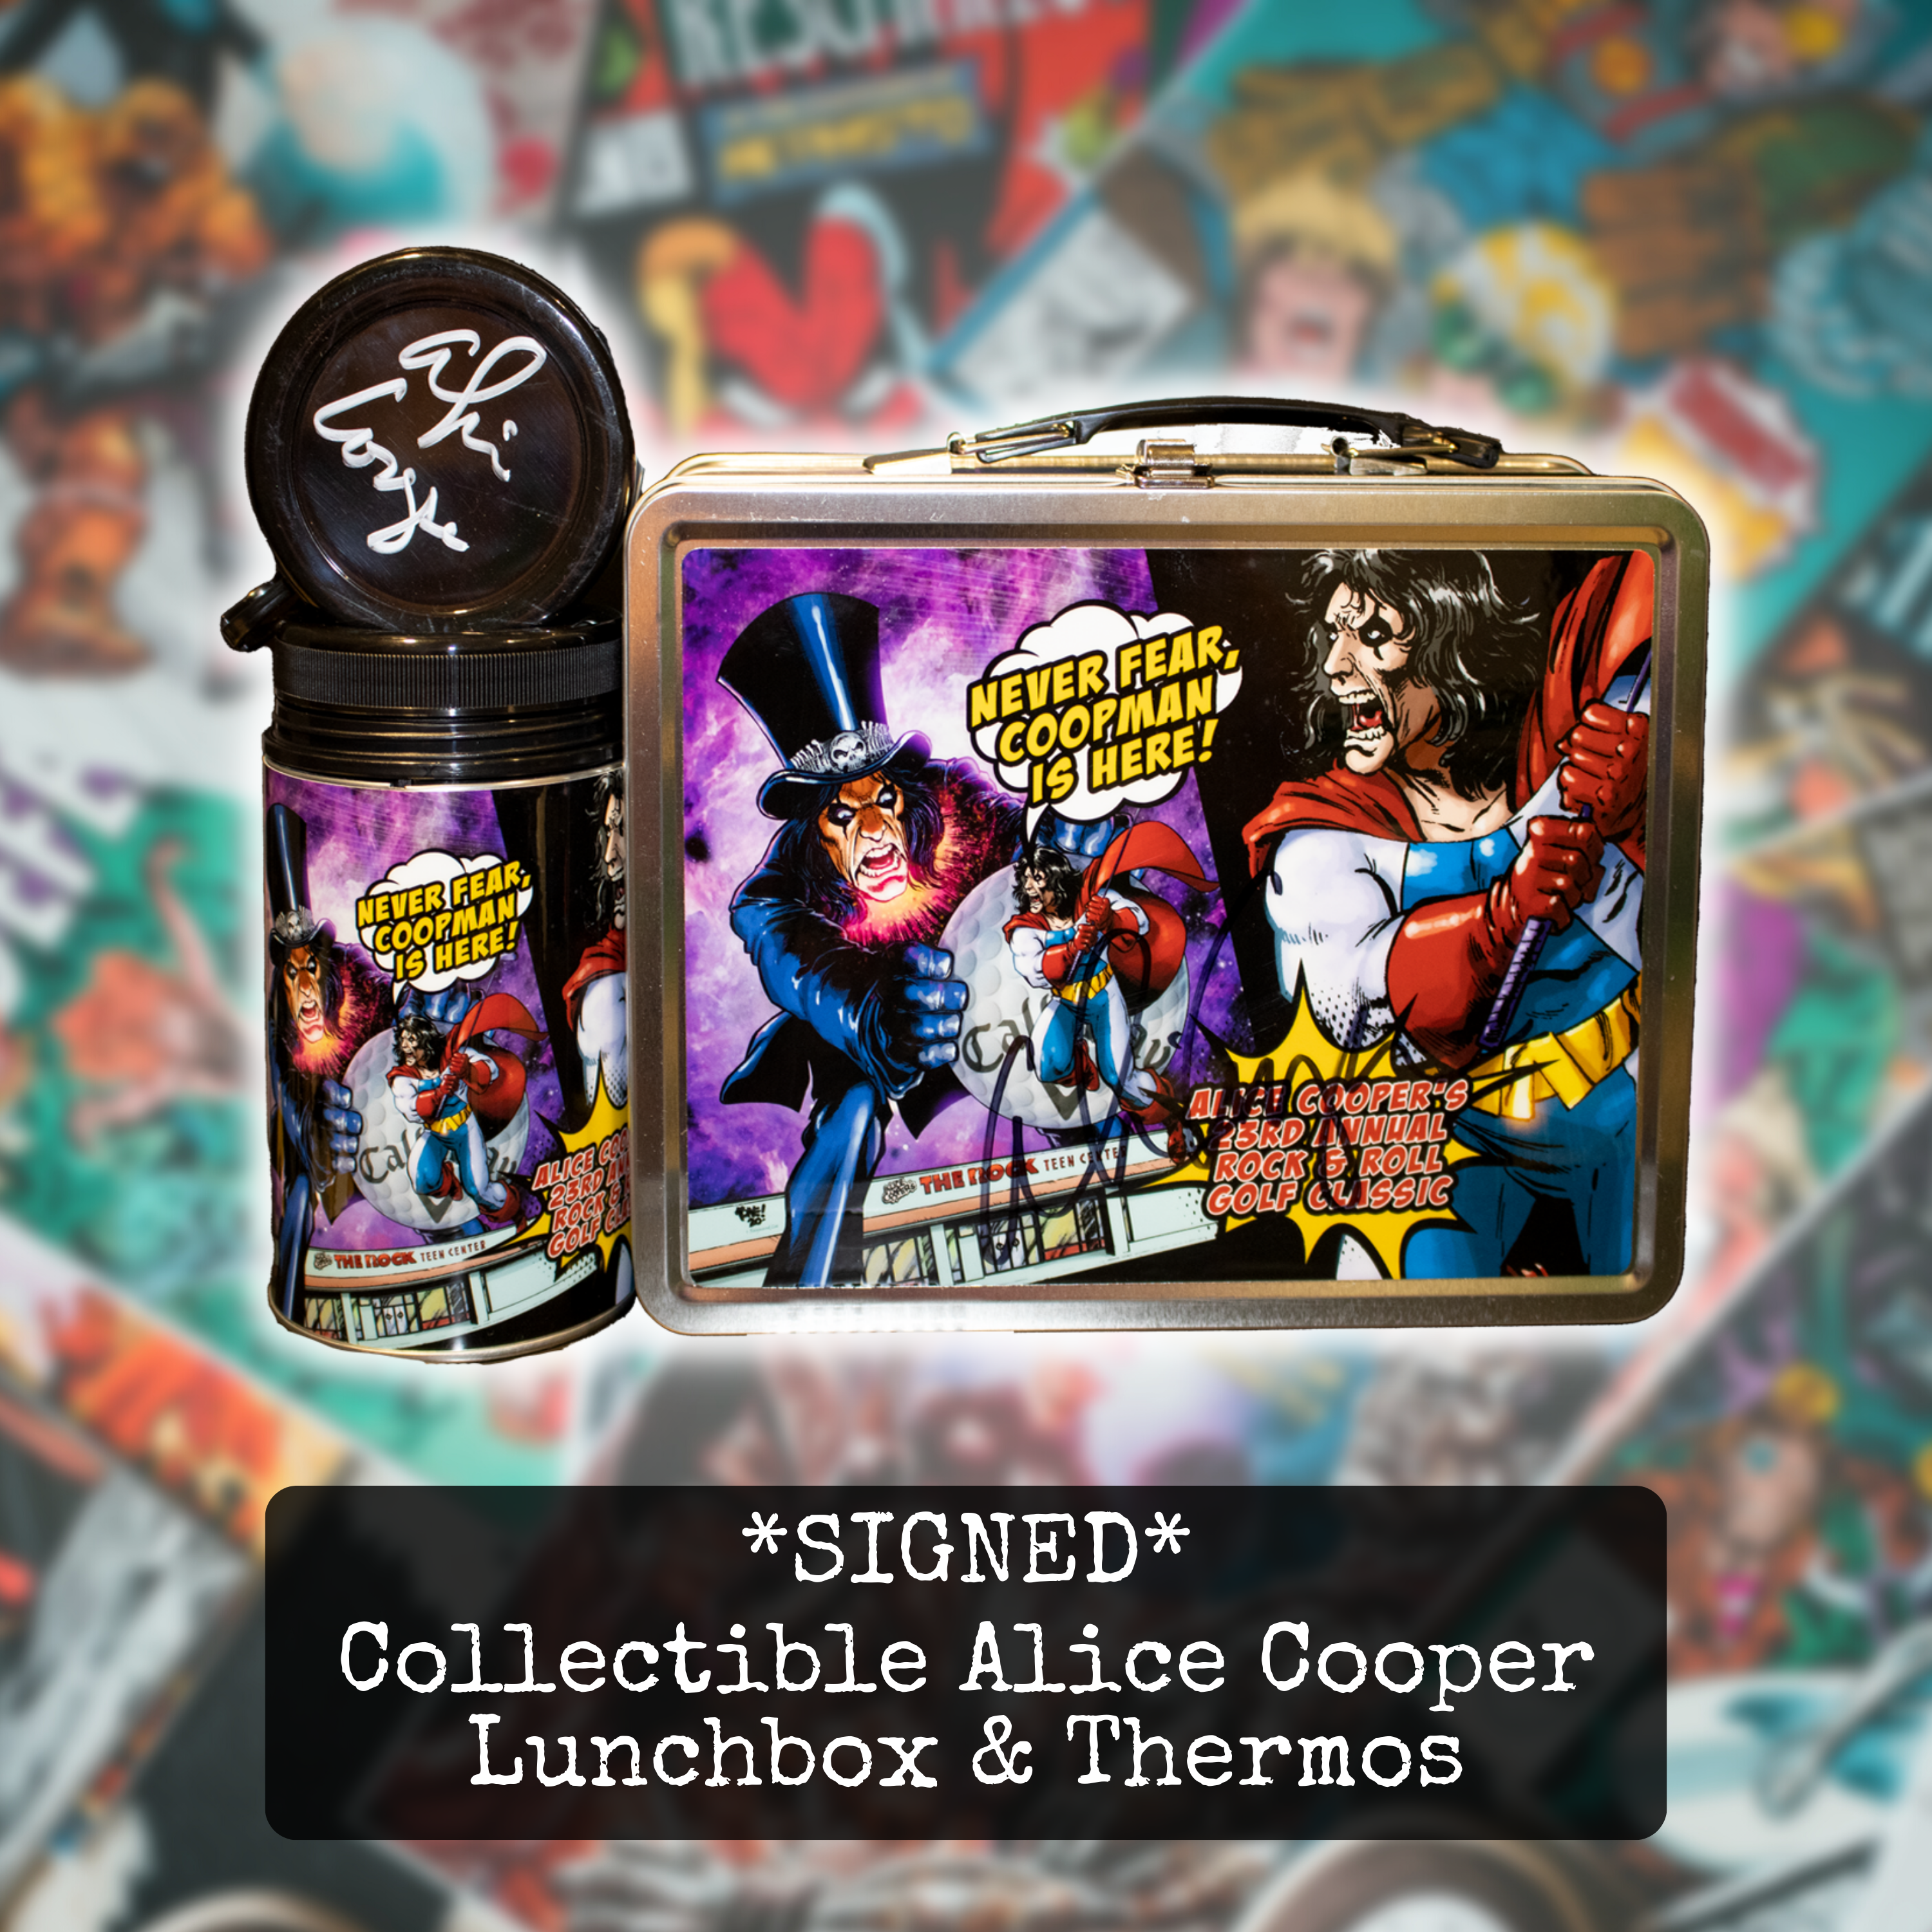 Signed* 'Coopman' Lunchbox & Thermos